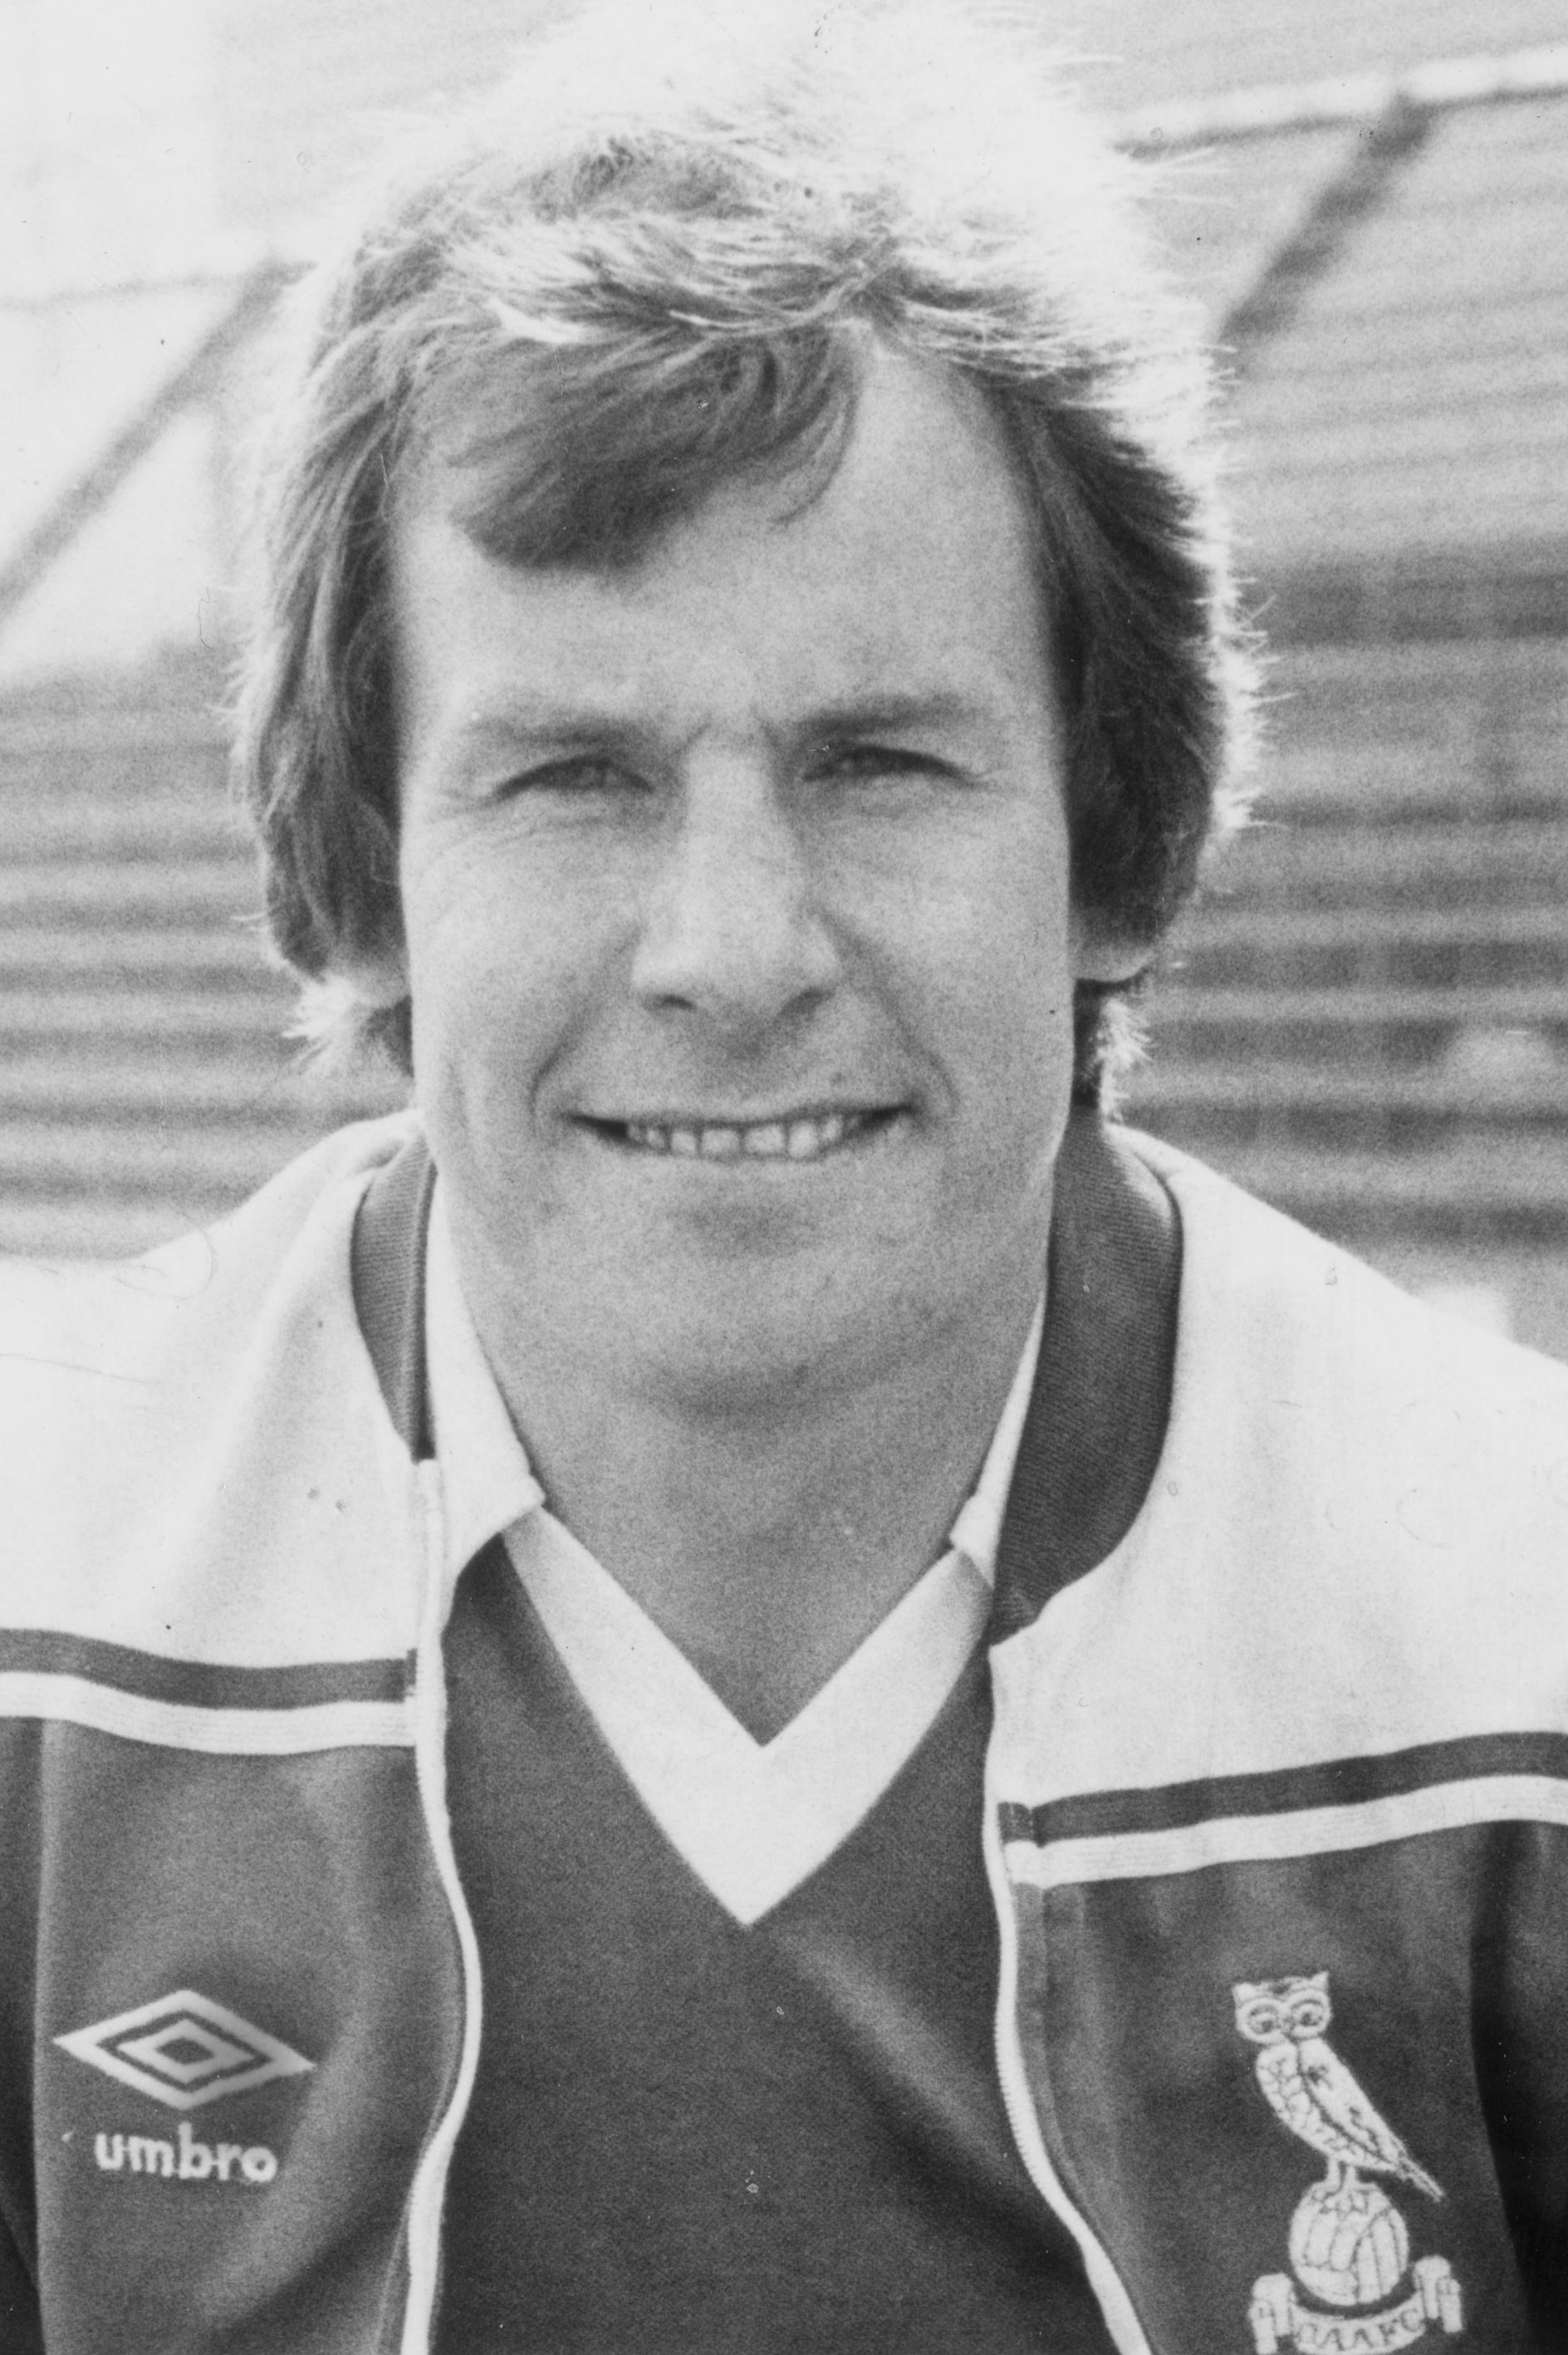 Joe Royle's Oldham went from second division to First, reaching an FA Cup semi-final and League Cup Final thanks to a synthetic pitch